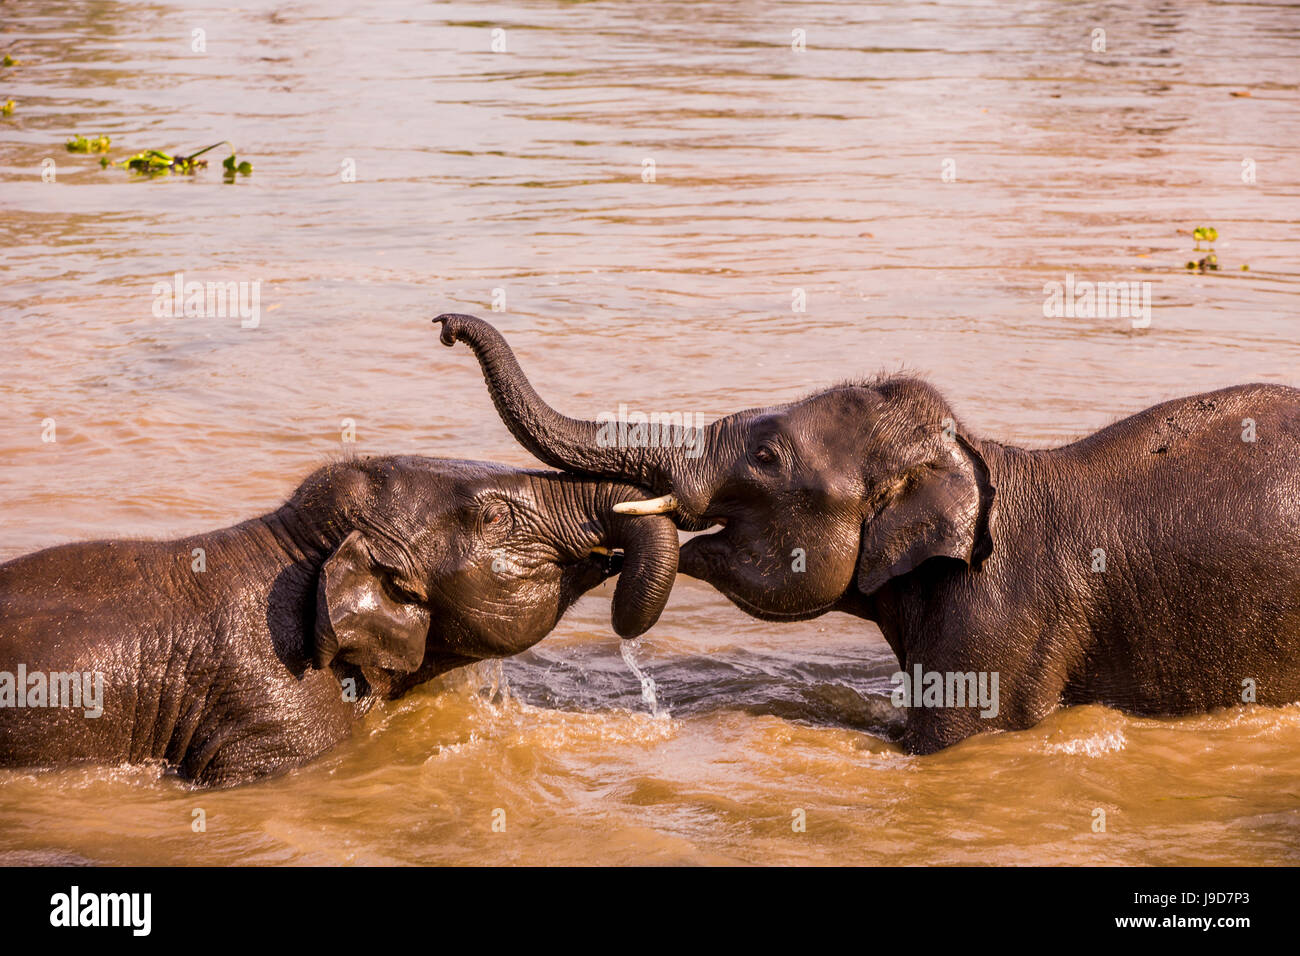 Baby elephants playing in the river, Chitwan Elephant Sanctuary, Nepal, Asia Stock Photo